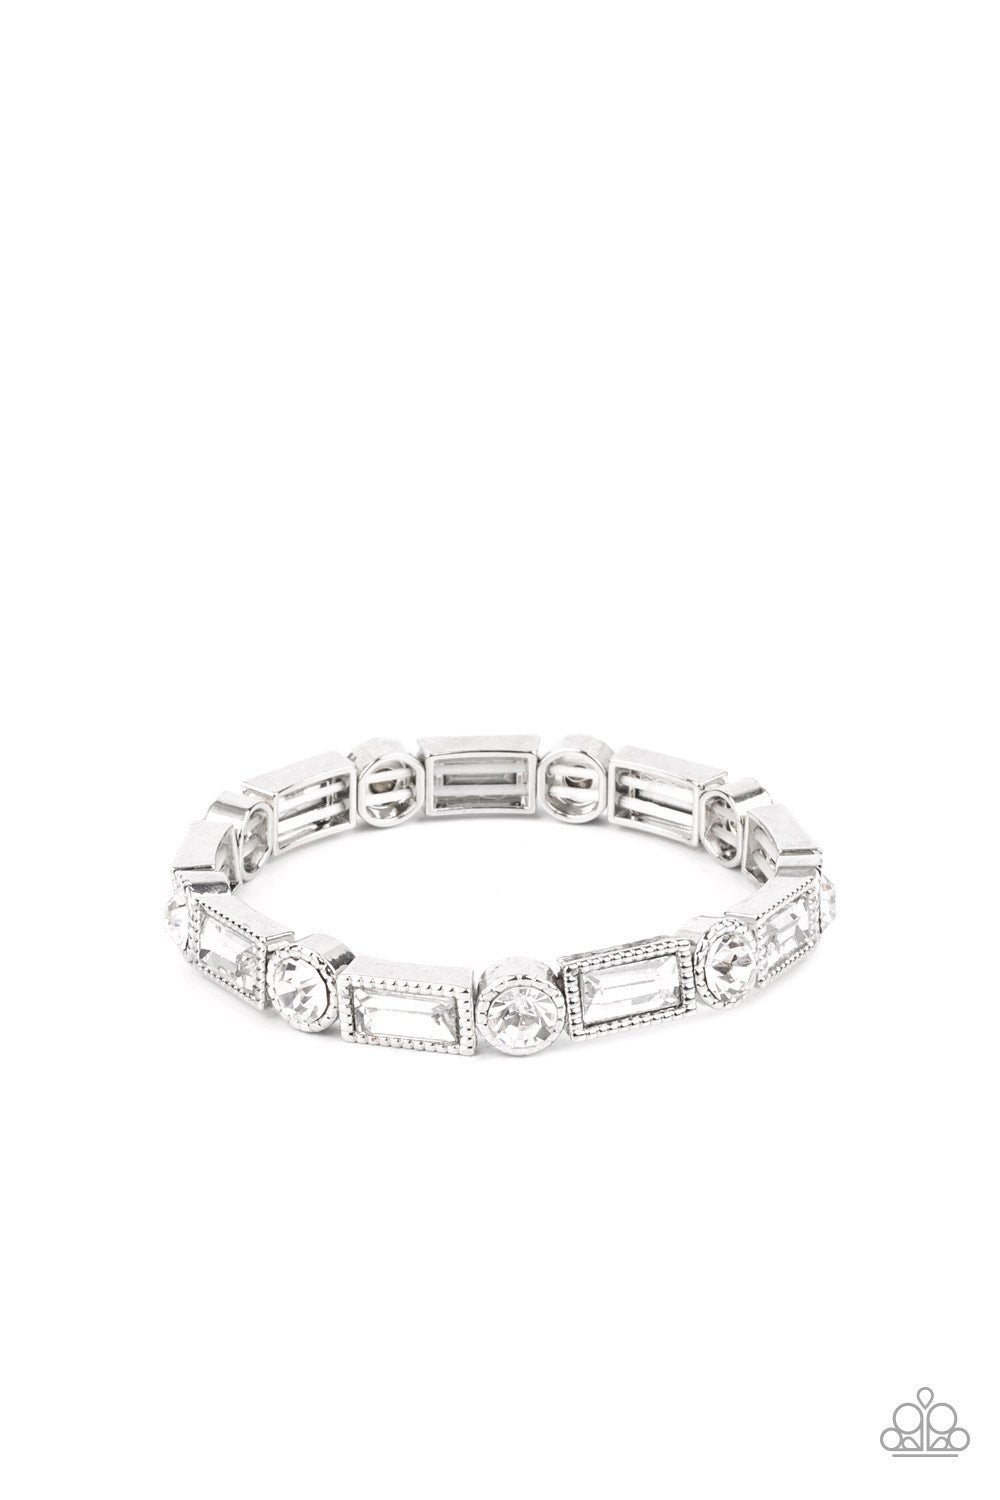 Paparazzi Jewelry Classic Couture - White Bracelet A Finishing Touch Classic round and baguette-cut rhinestones set in shiny dotted silver frames alternate around the wrist on stretchy bands for a shimmering finish. Sold as one individual bracelet.